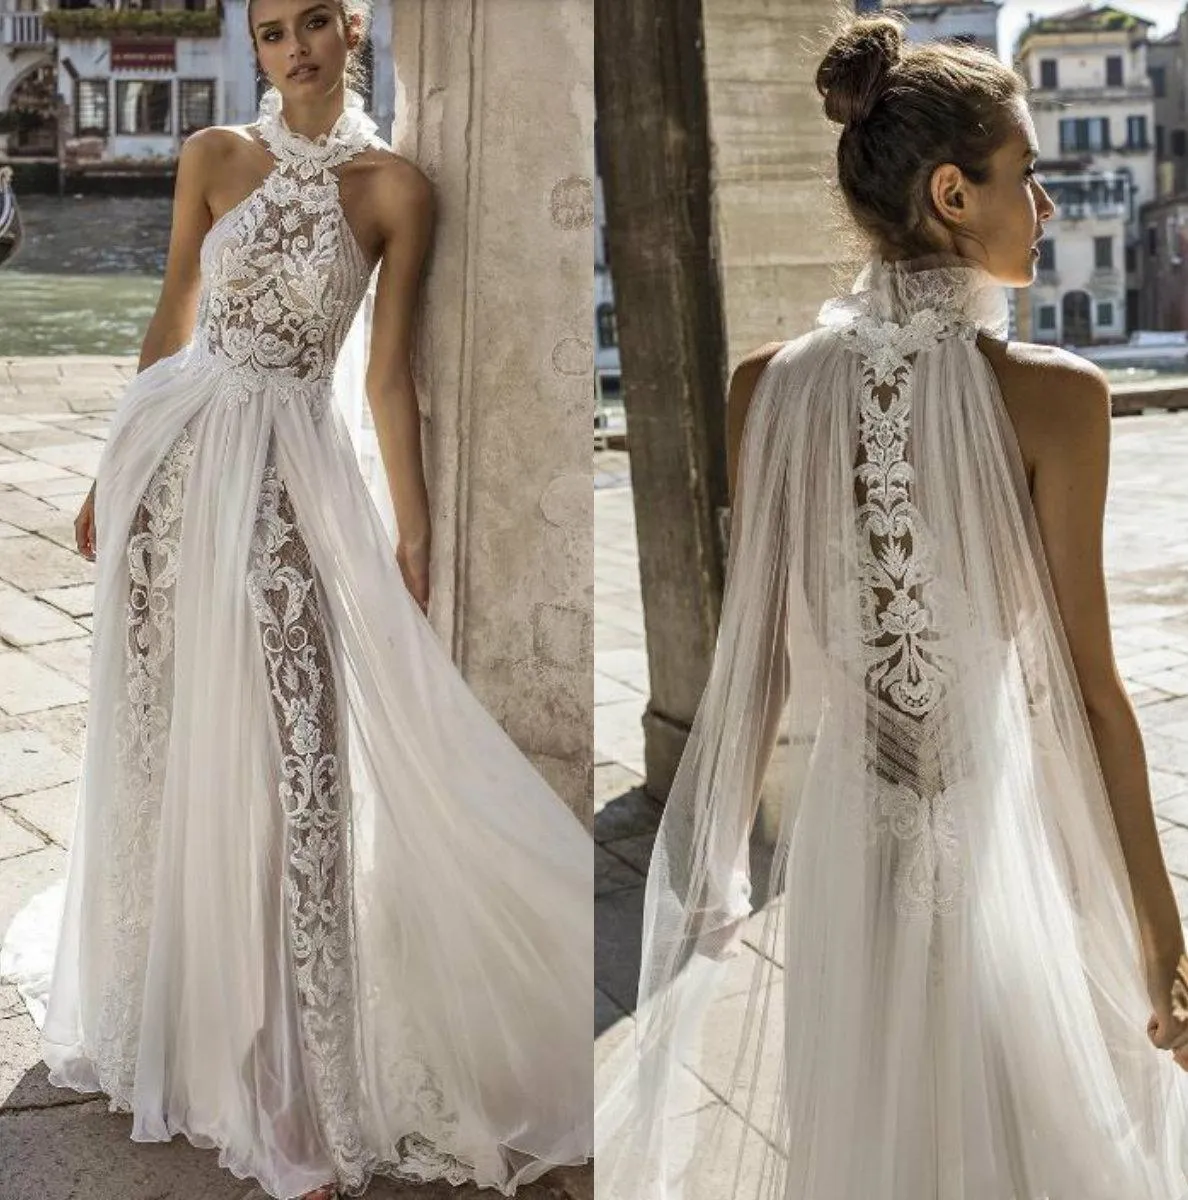 Delicate A Line Wedding Dresses Boho Country Lace Appliqued Sweep Train Beach Wedding Dress High Neck Western Bridal Gowns